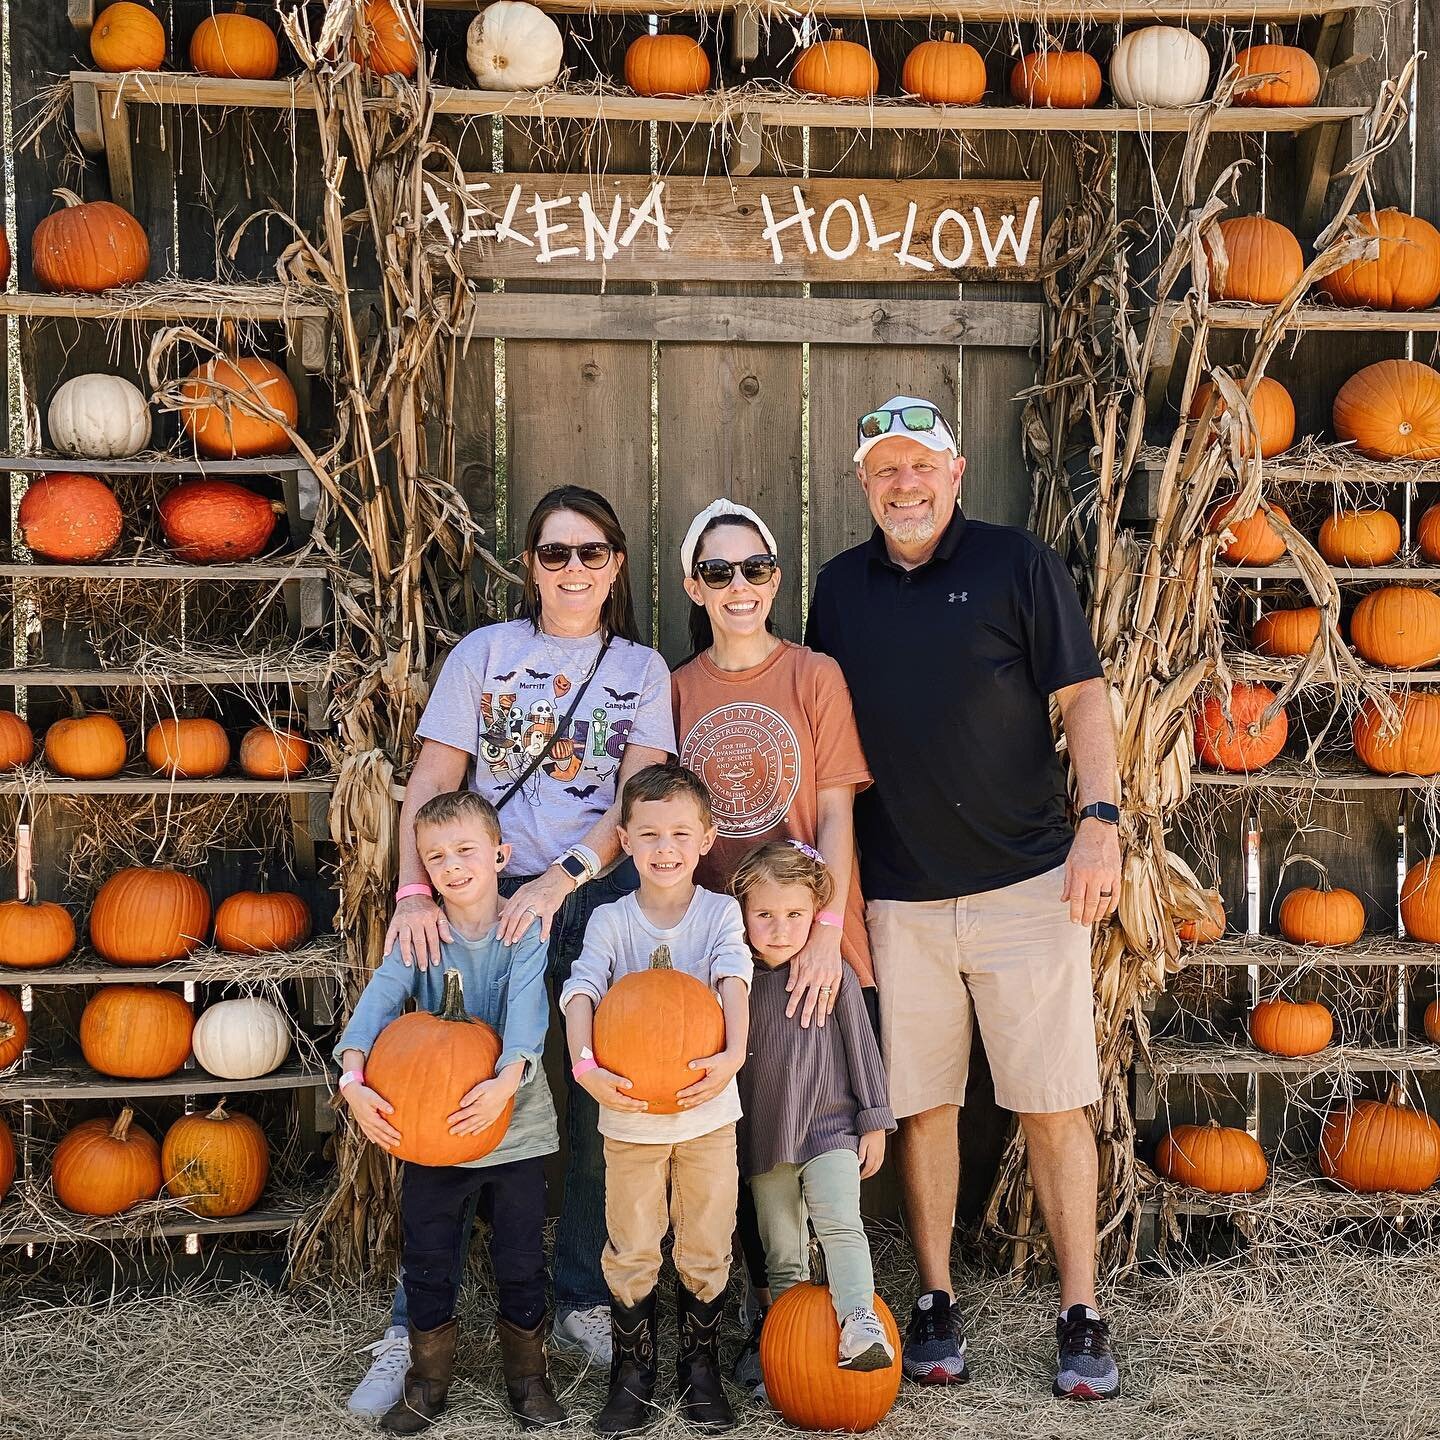 Three pumpkin puns that made us giggle&hellip;
🎃We carved out some time to pick pumpkins.
🎃Go big or gourd home. 
🎃Orange you pumped for pumpkin pickin&rsquo;?

Visits from YiaYia &amp; Papi are good for the soul! ❤️